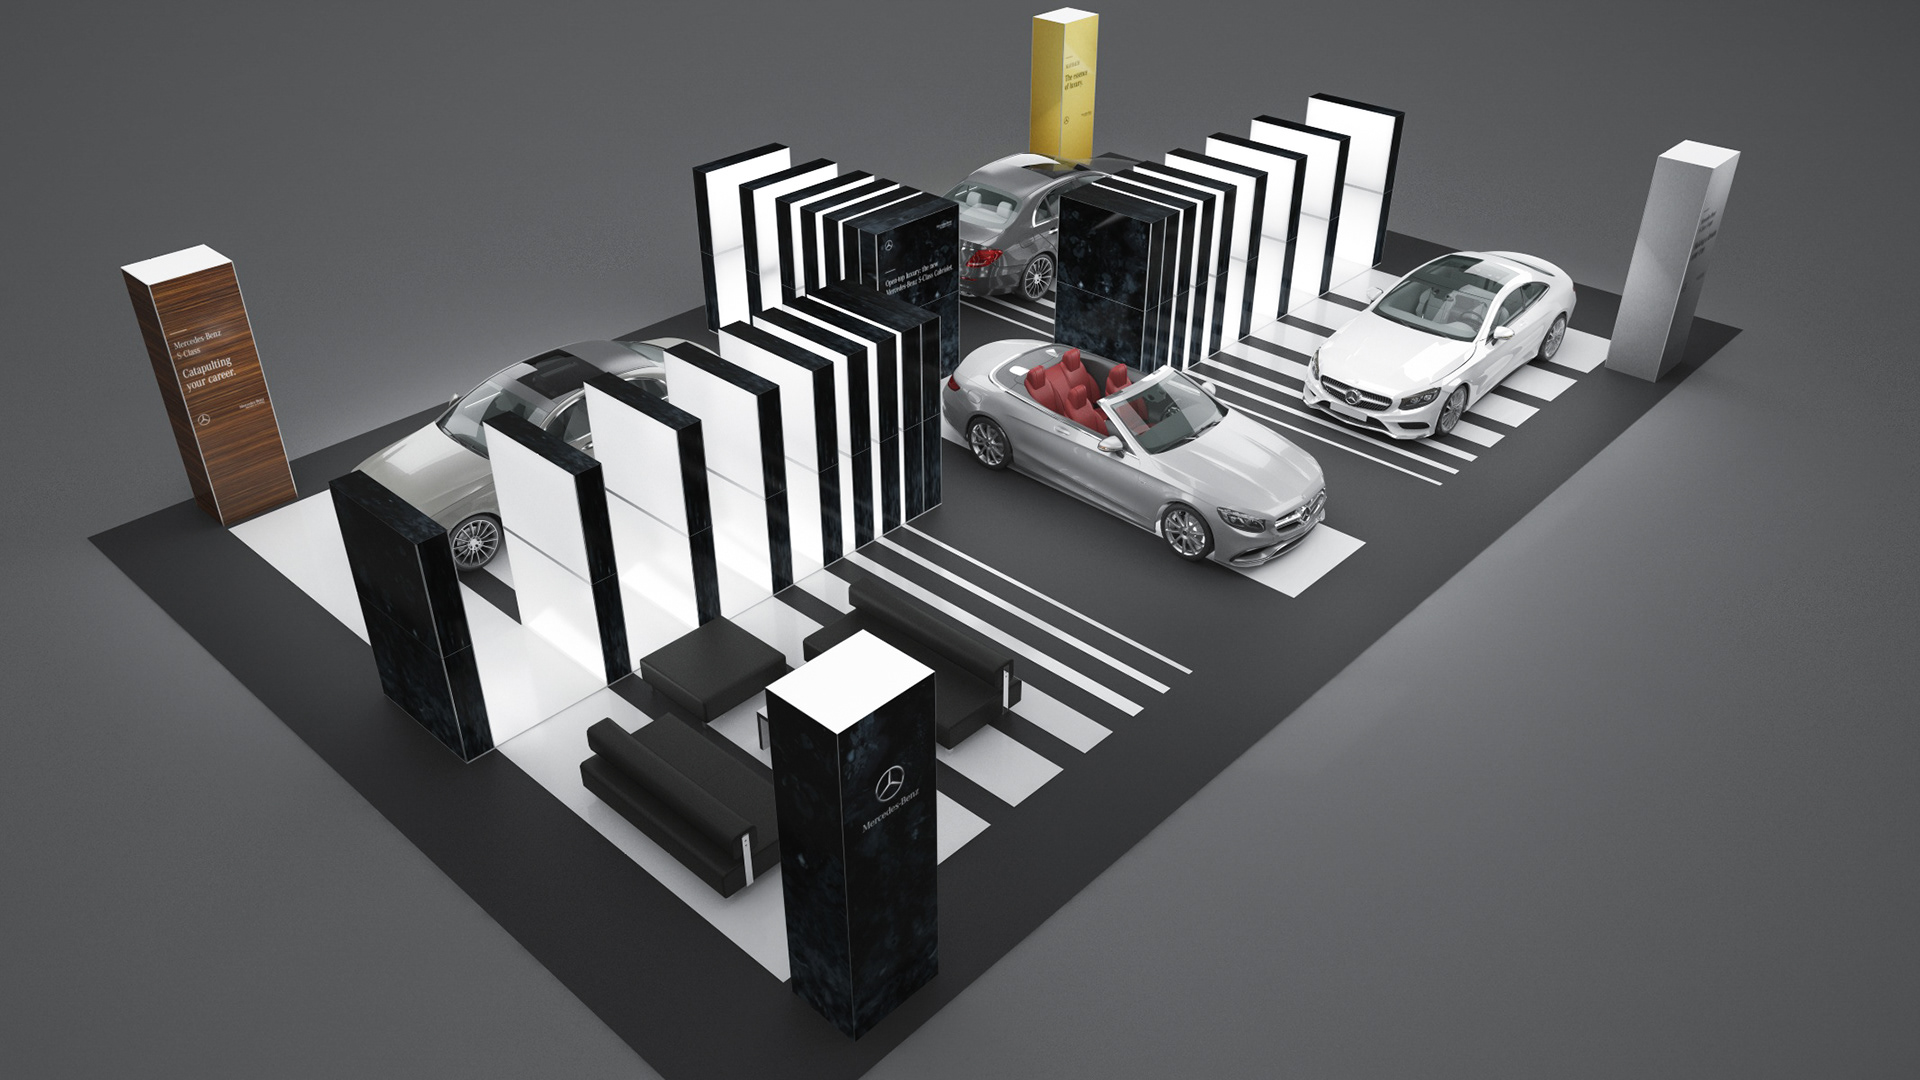 MERCEDES launch events & showroom kits, event design&styling referencia